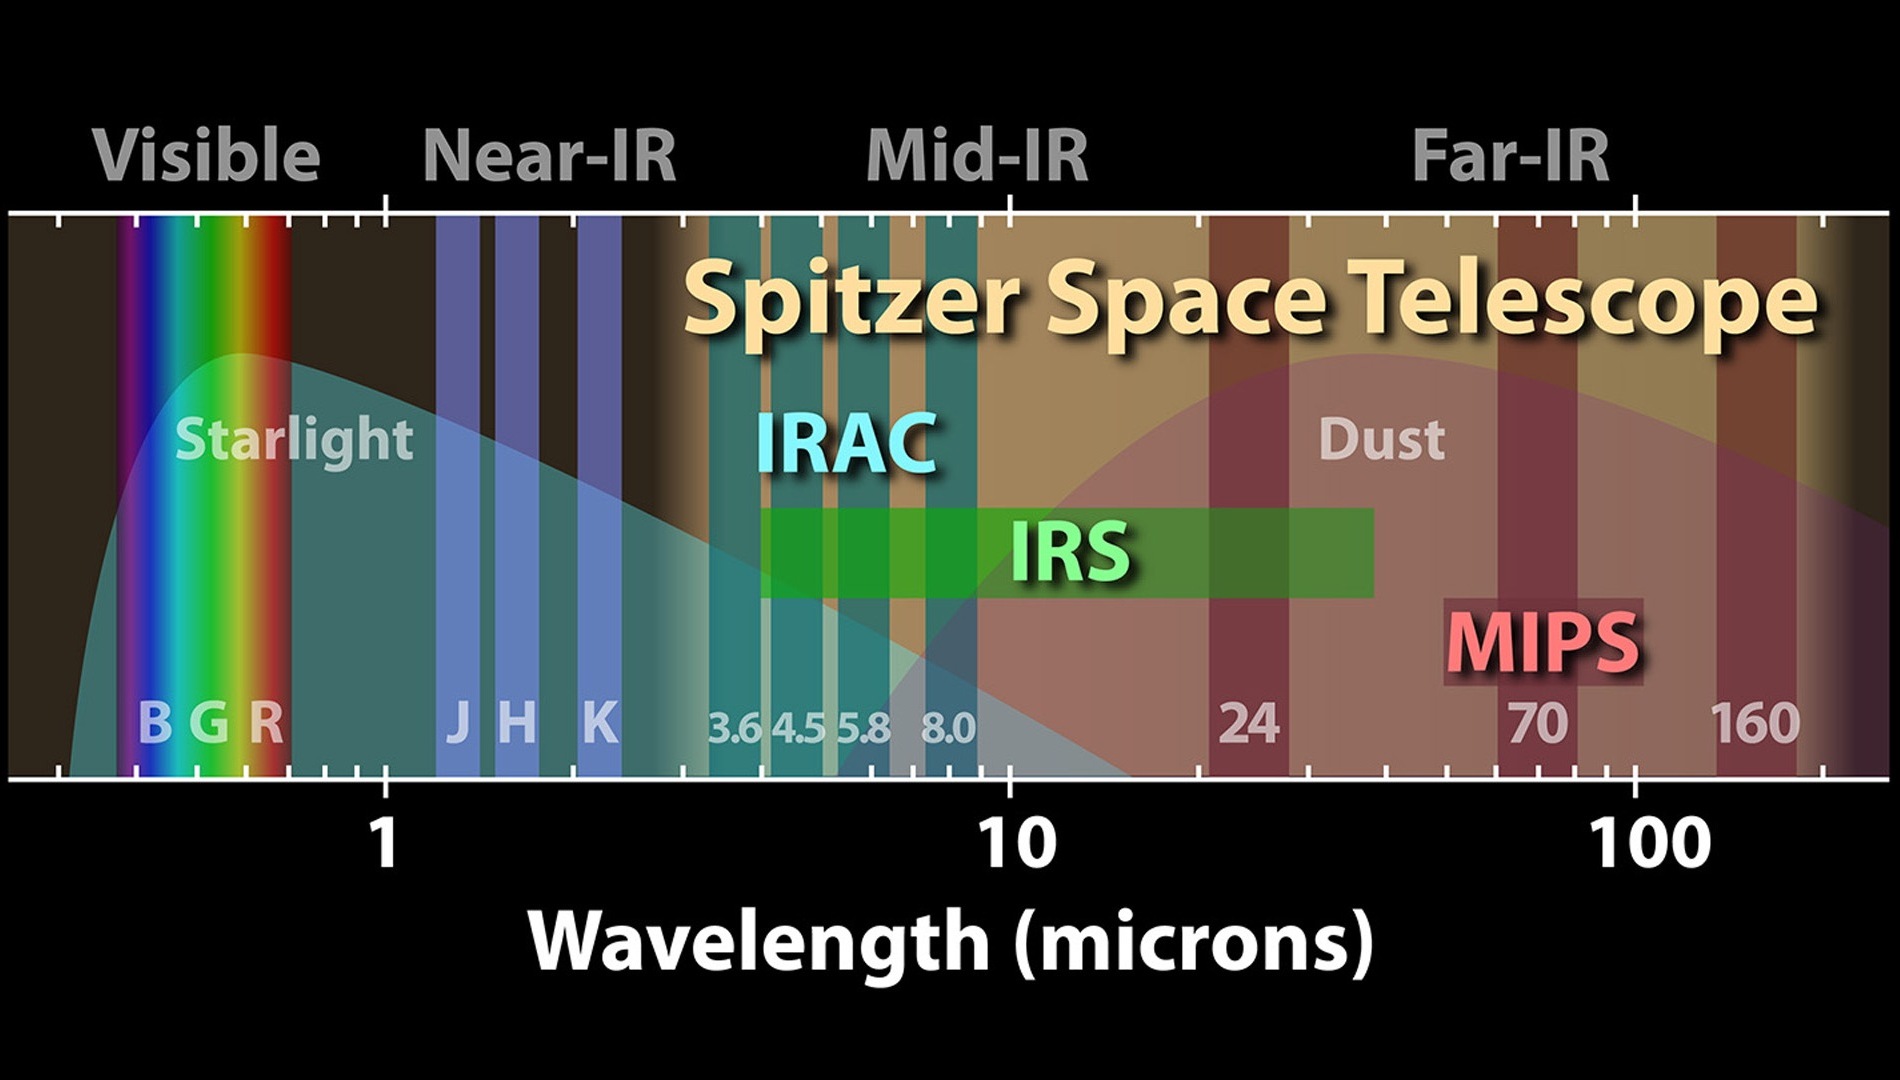 9 of 11. NASA's Spitzer Space Telescope is an infrared eye onto the universe. This diagram illustrates just where Spitzer's vision extends in the spectrum of light, shown as a horizontal band.Vertical bars indicate the different regions of the electromatic spectrum. On the left is the visible spectrum, covering the extent of human vision. Next are the J, H, and K bands commonly used by ground-based infared observatories. On the right are the wavelengths spanned by Spitzer's detectors. The Spitzer Space Telescope's three science instruments operate in the mid- to far-infrared between 3 and 160 microns.The Infrared Array Camera (IRAC) takes images at four fixed wavelenths ranging from 3.6 to 8.0 microns.The Infrared Spectrograph (IRS) has four modules that break light into a spectrum of infrared colors, much like a prism. These detectors range from 5.3 to 40 microns.The Multiband Imaging Photometer for Spitzer (MIPS) takes images at three fixed wavelengths ranging from 24 to 160 microns. MIPS can also function as a spectrograph in the range of 50 to 100 microns.Two primary sources of light in the universe are stars and dust. The background of the diagram shows the relative influences due to starlight and dust across the spread of the infrared spectrum. (Credit: NASA/JPL-Caltech)